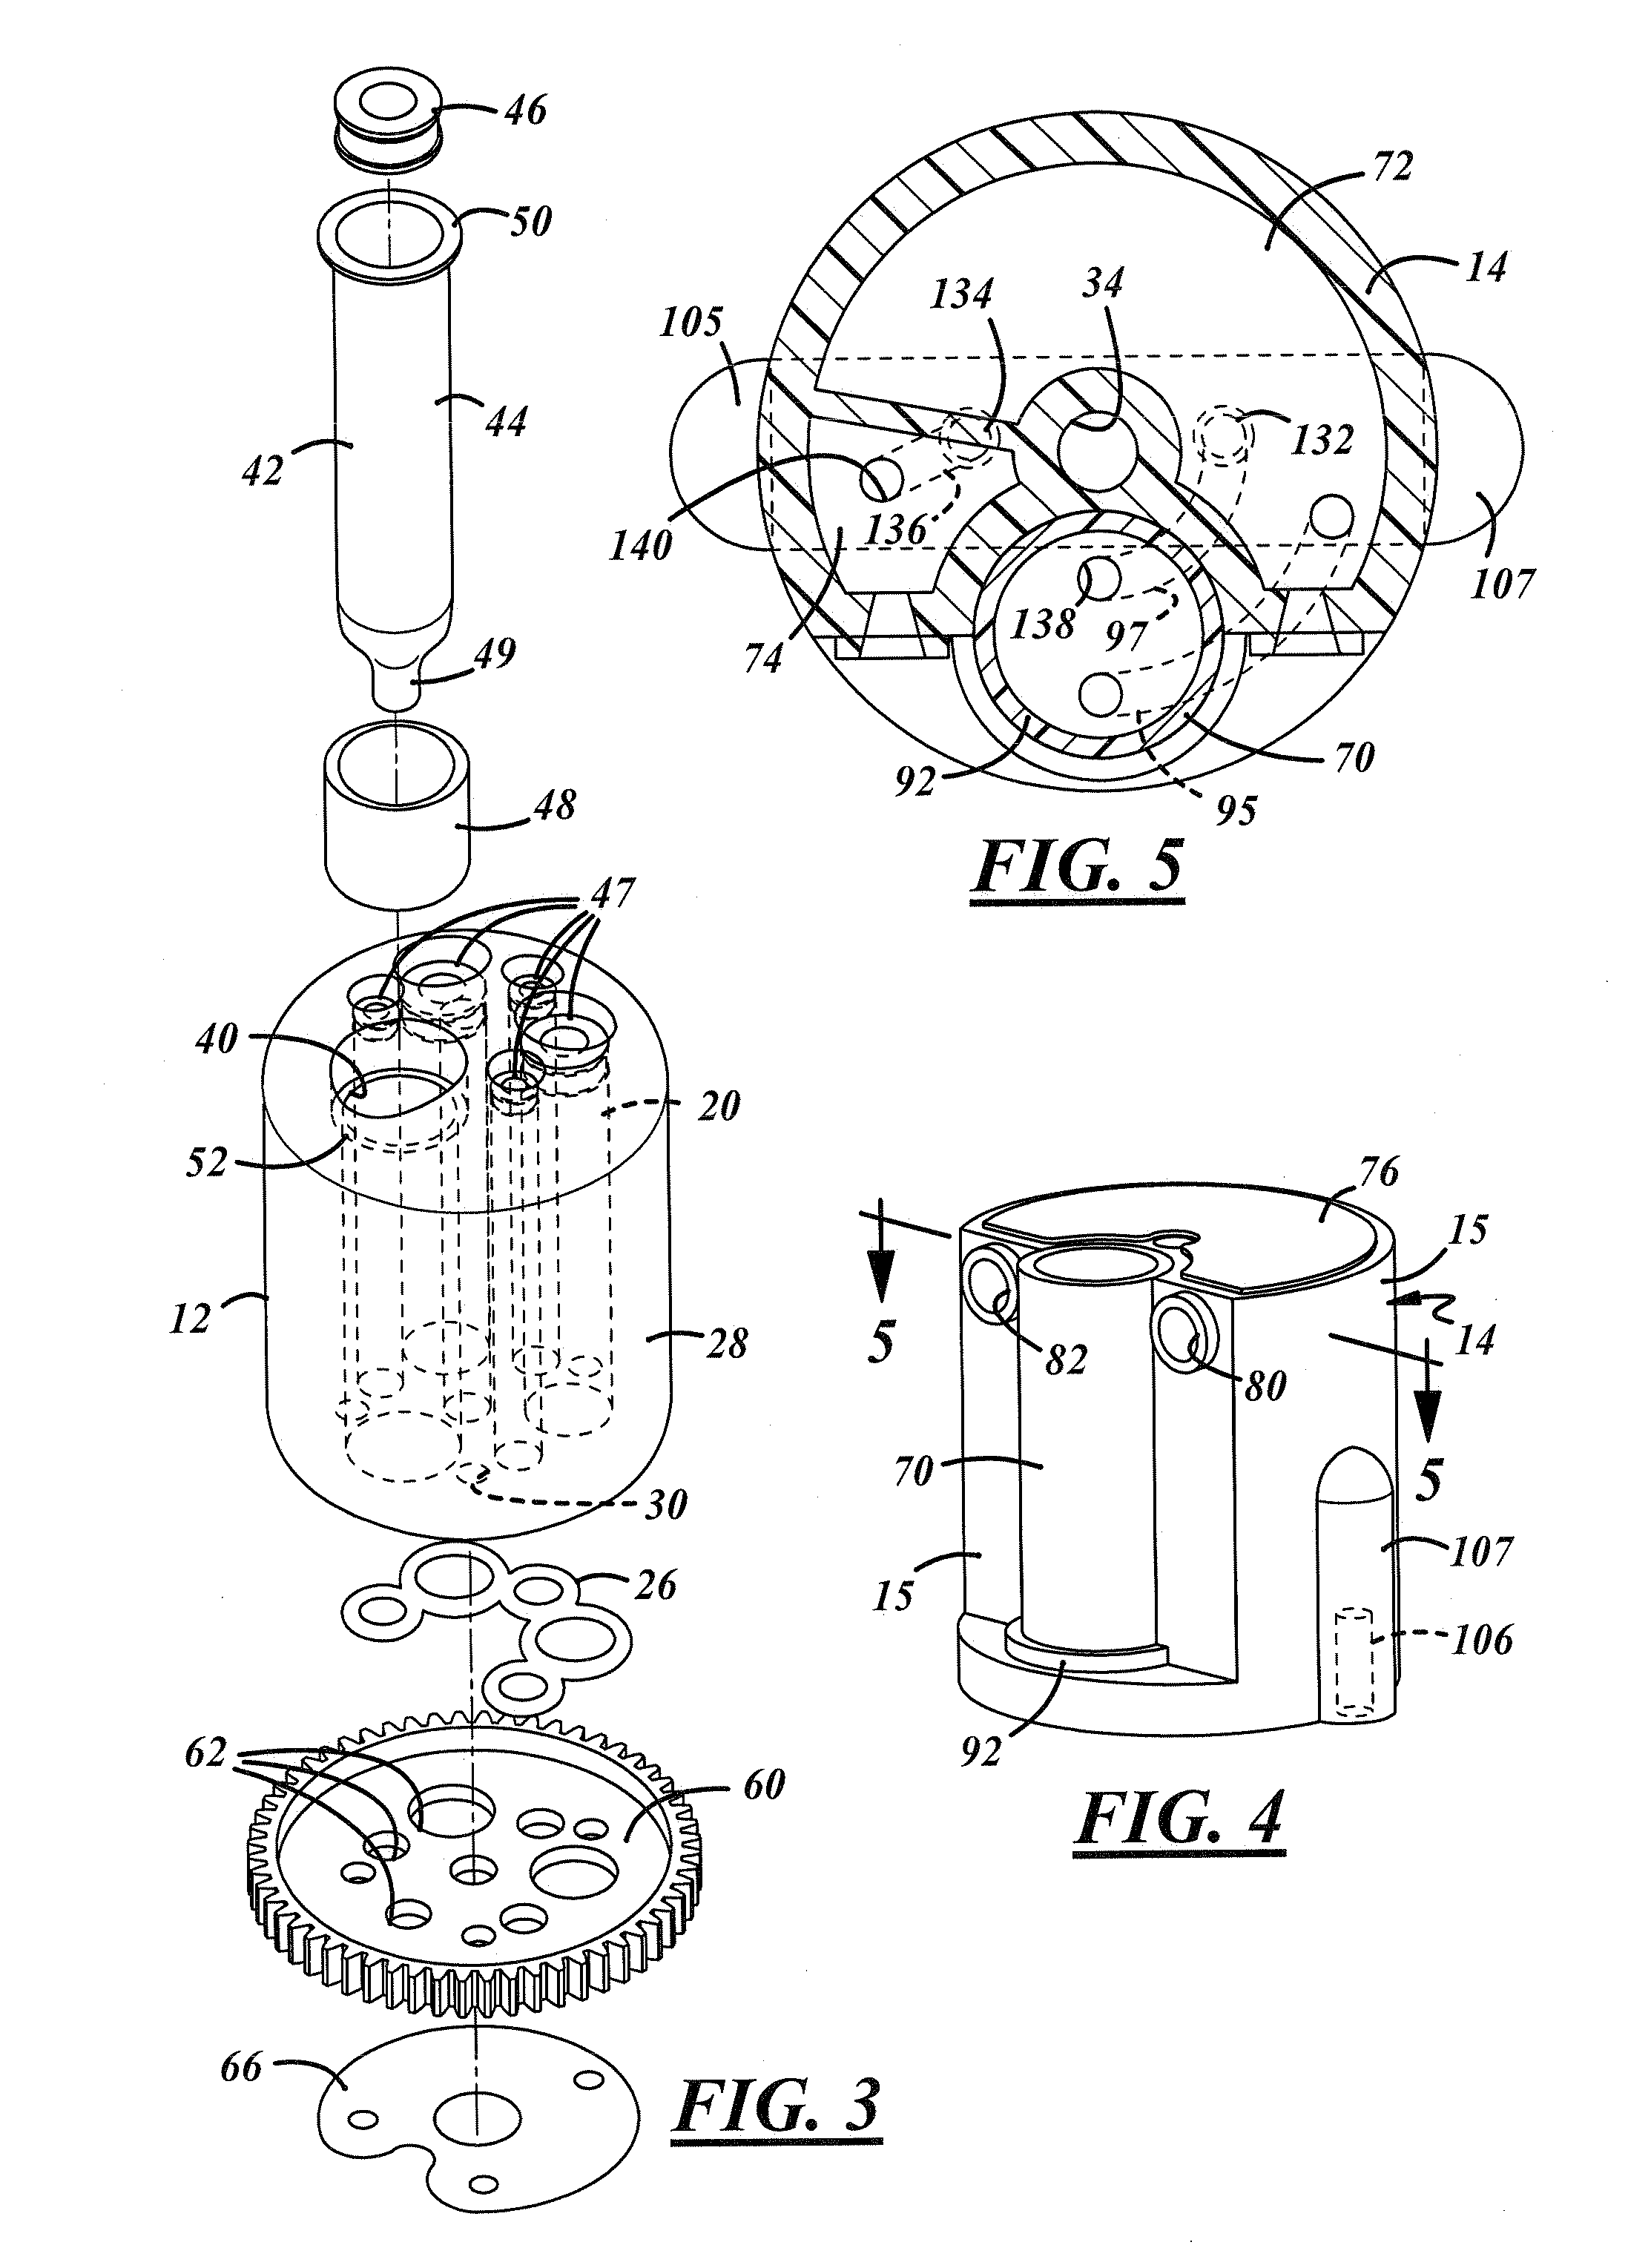 Nucleic acid testing device and method